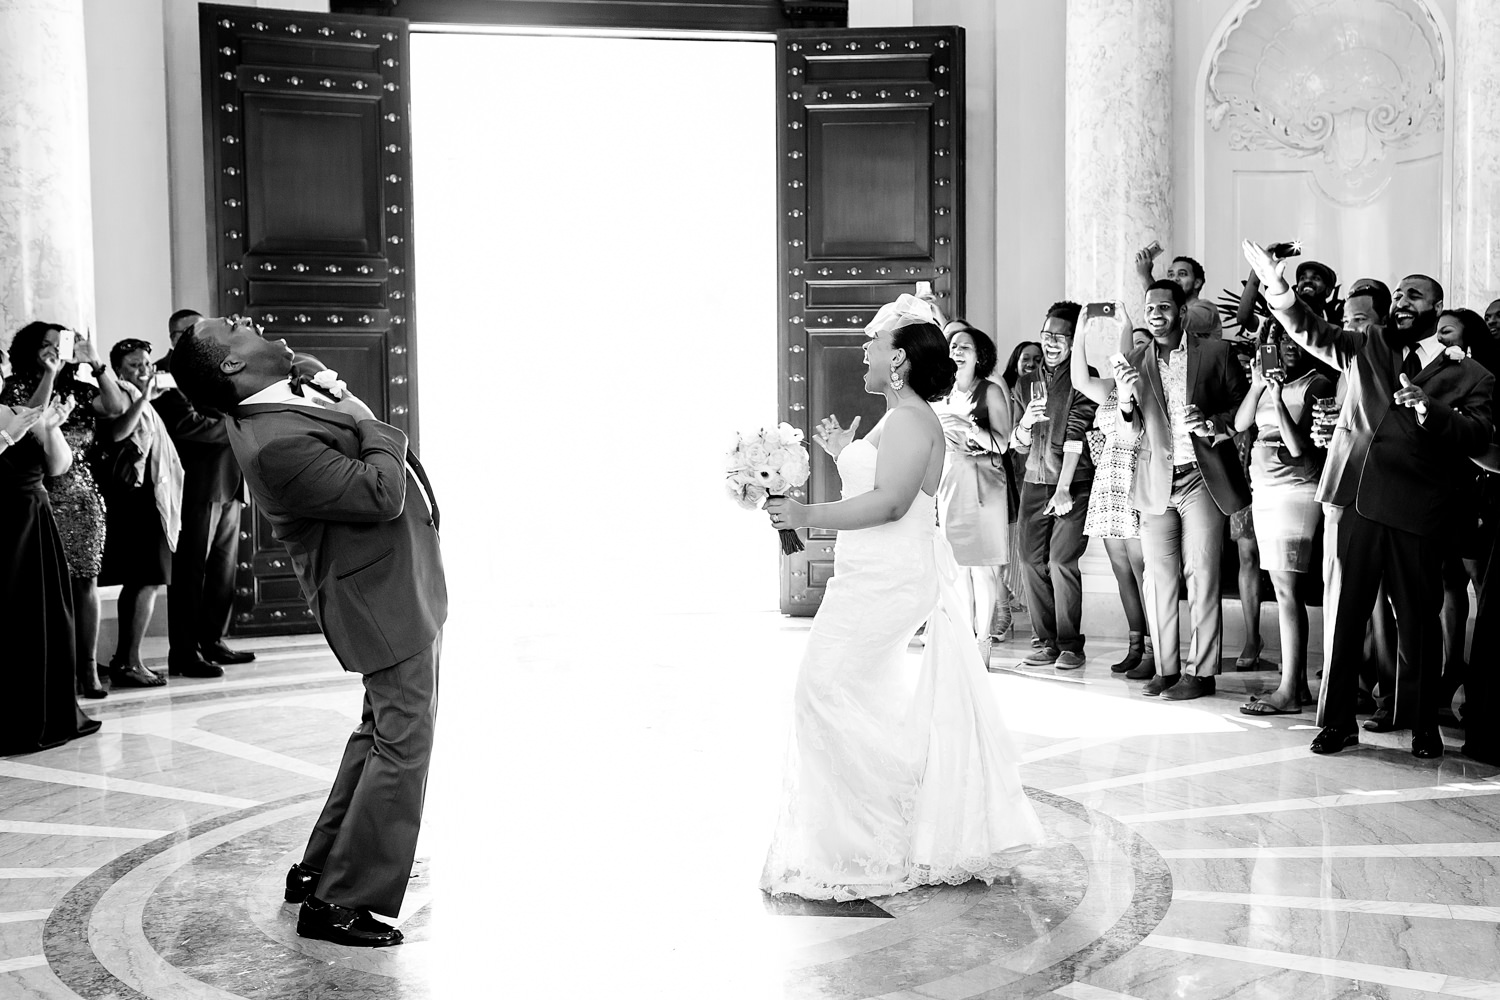 This wedding is at the Carnegie Library in Washington DC, The couple just entered the building at the beginning of their reception and they are cheering dramatically with the crowd also cheering them on, This joyous photo is of a black couple singing loudly and arching backward in dance to get the party started, Catching the moment, Procopio Photography, best top Washington DC photographer, best top Maryland photographer, best top Virginia photographer, best top DMV photographer, best top wedding photographer, best top commercial photographer, best top portrait photographer, best top boudoir photographer, modern fine art portraits, dramatic, unique, different, bold, editorial, photojournalism, award winning photographer, published photographer, memorable images, be different, stand out